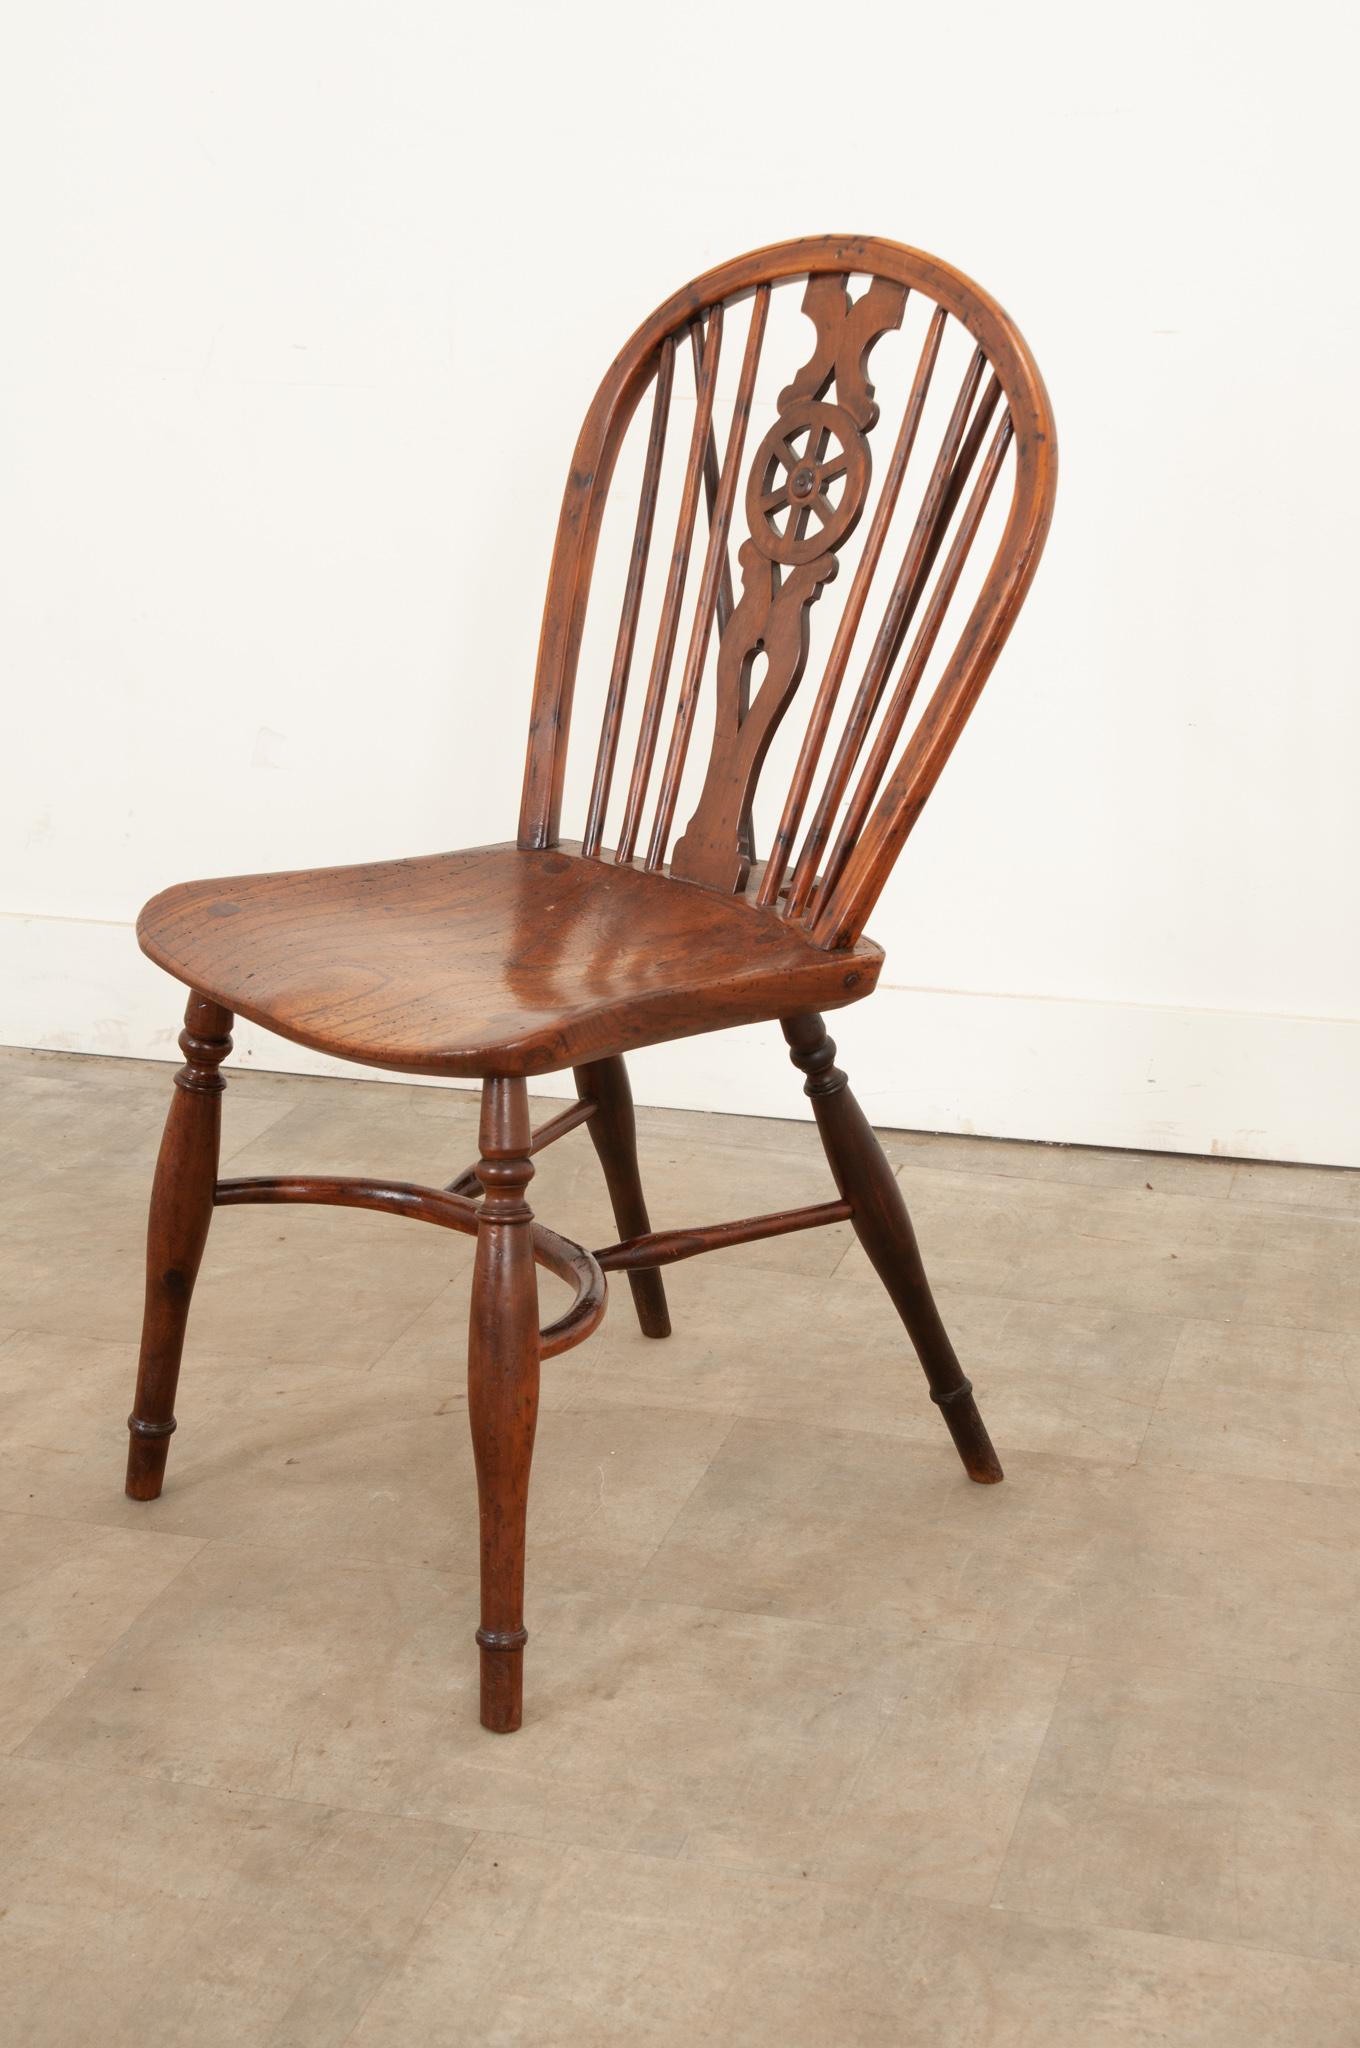  A handsome early 19th century oak wheelback windsor chair. Hand-crafted circa 1810 this attractive chair has a hooped back with a wonderful, pierced wheelback over a well figured seat and elegant turned legs united by a crinoline stretcher. This